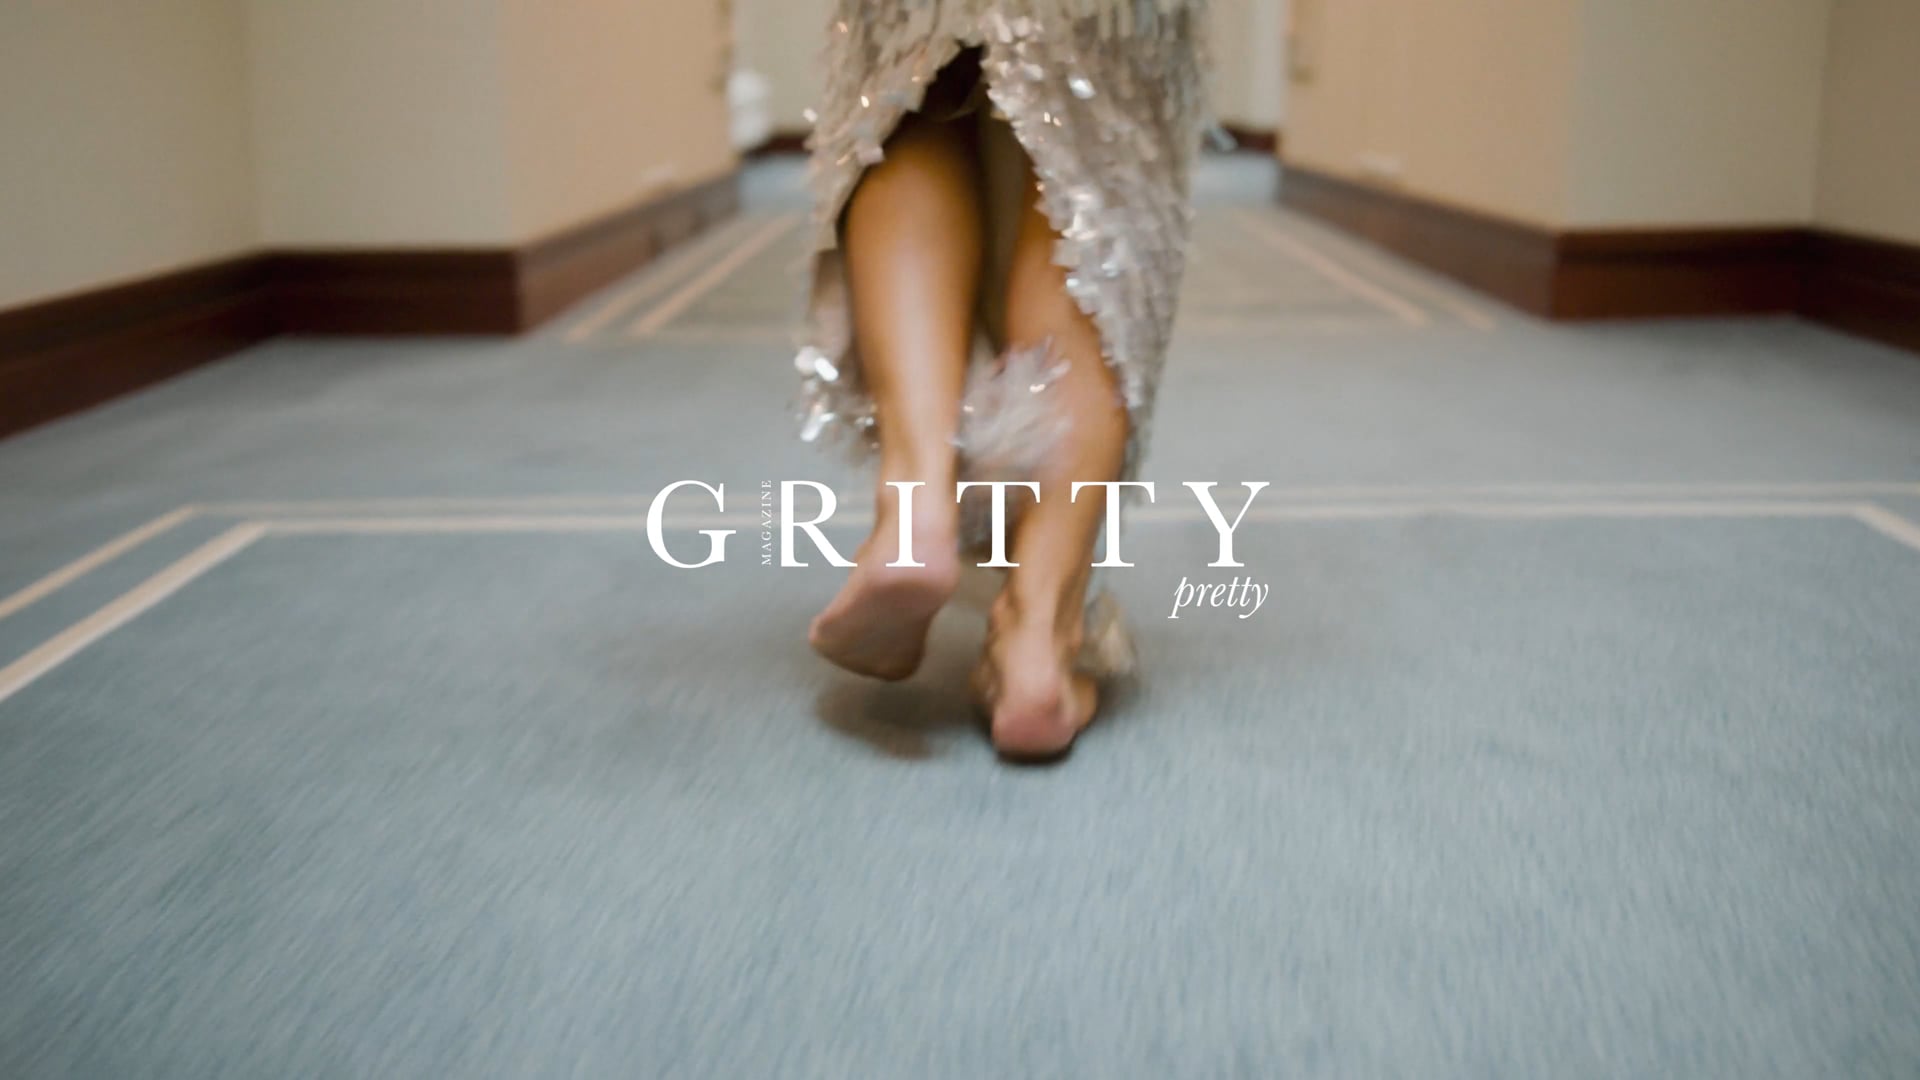 Gritty Pretty - Summer 2021 Cover Shoot